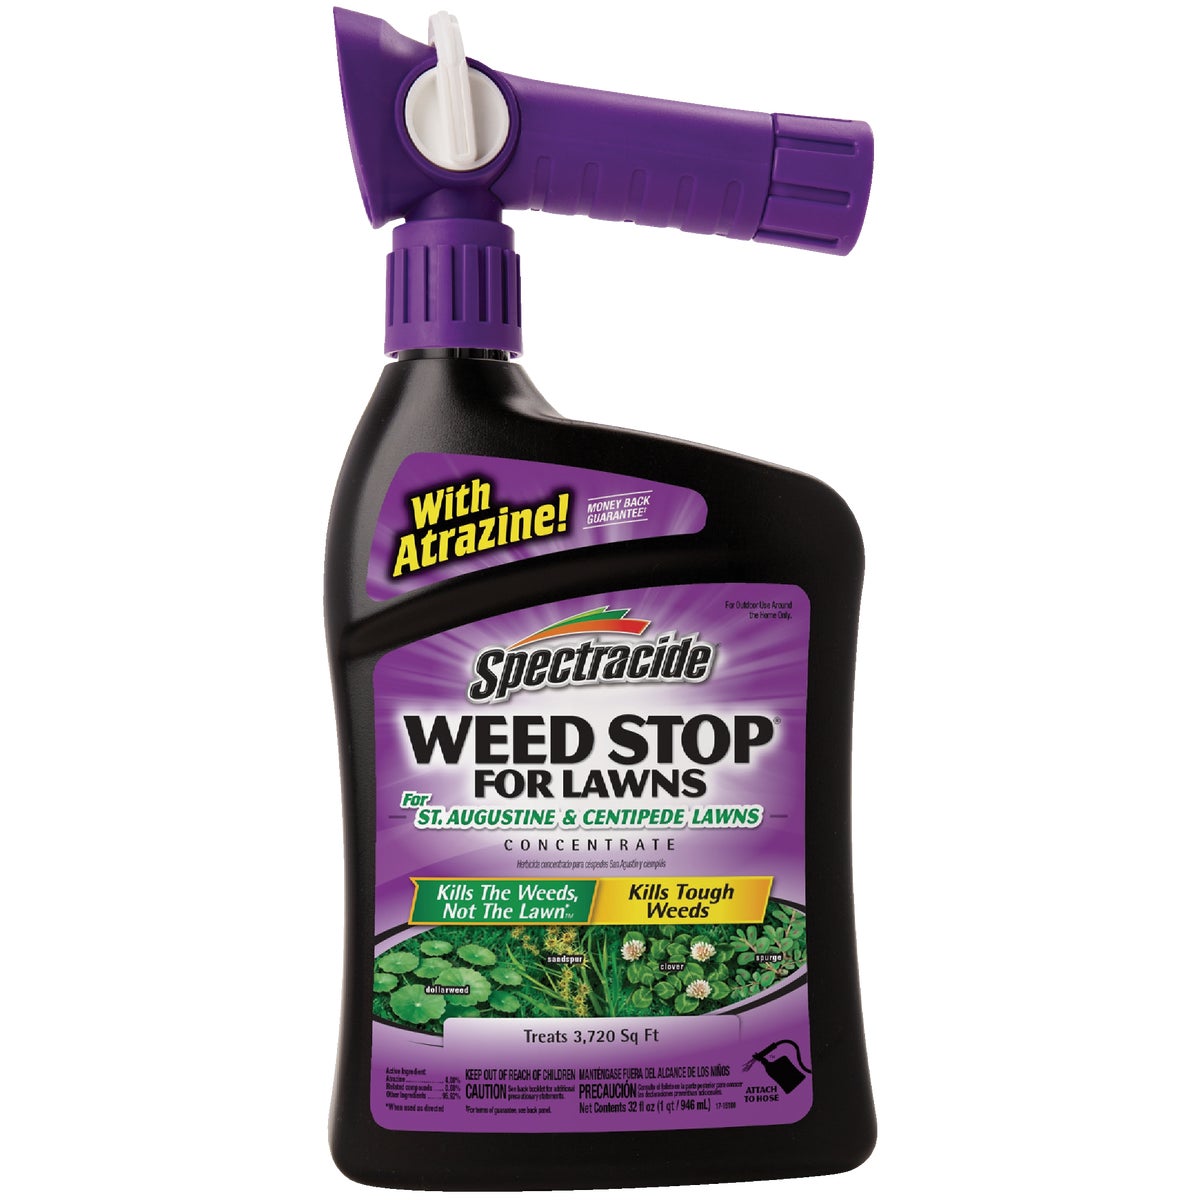 Spectracide Weed Stop For St. Augustine & Centipede Lawns 32 Oz. Ready To Spray Weed Killer